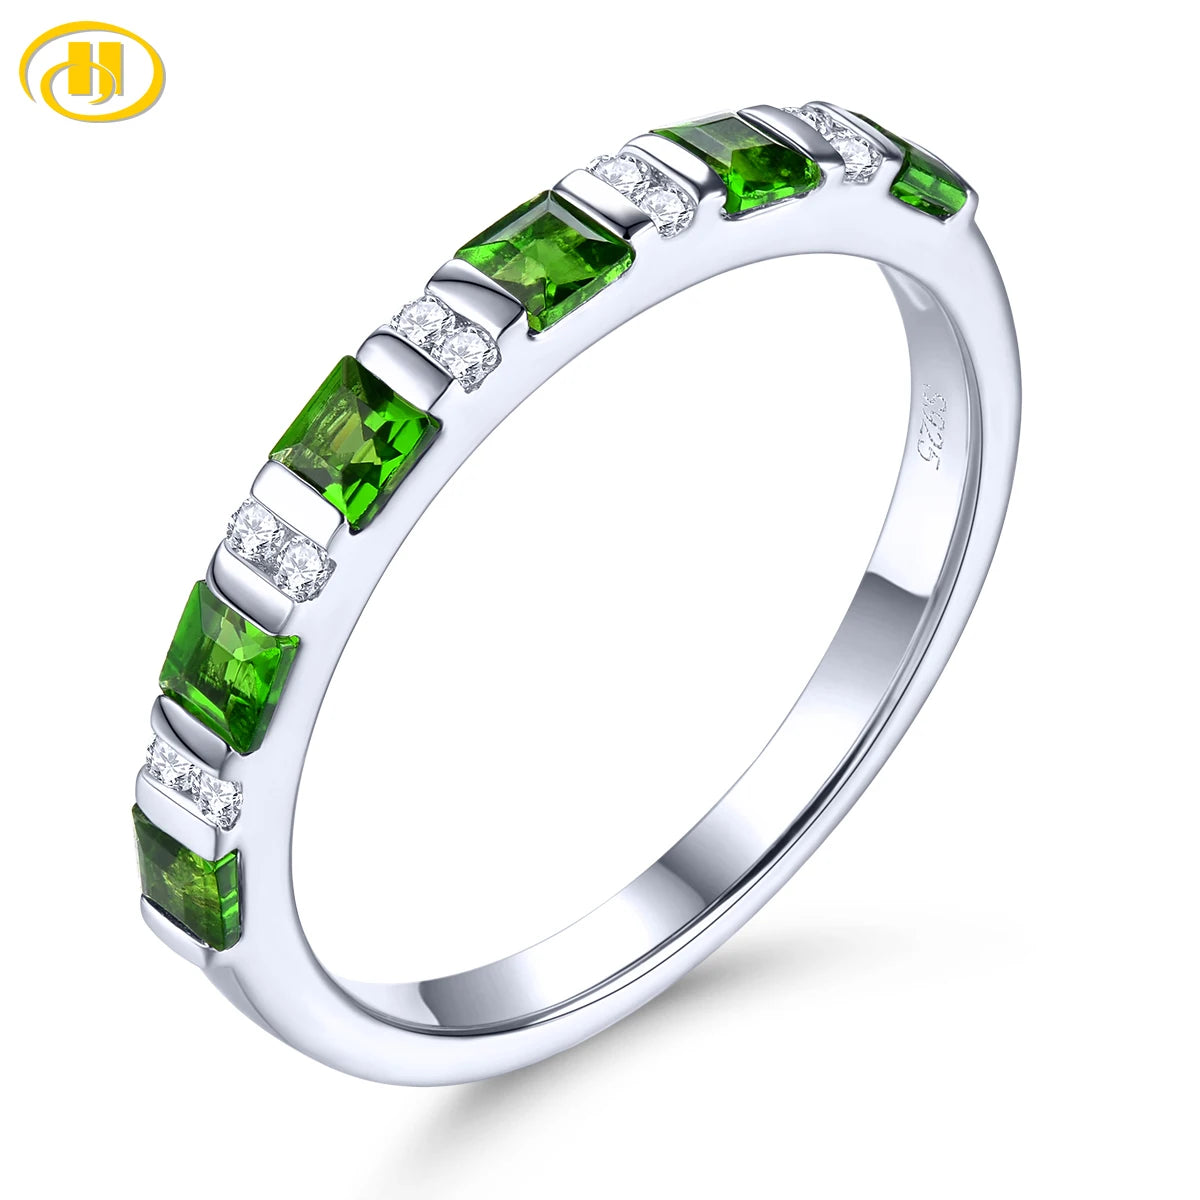 Natural Genuine Chrome Diopside Silver S925 Ring Women Classic Elegant Fine Jewelry Top Quality Meaningful Birthday Gifts 9